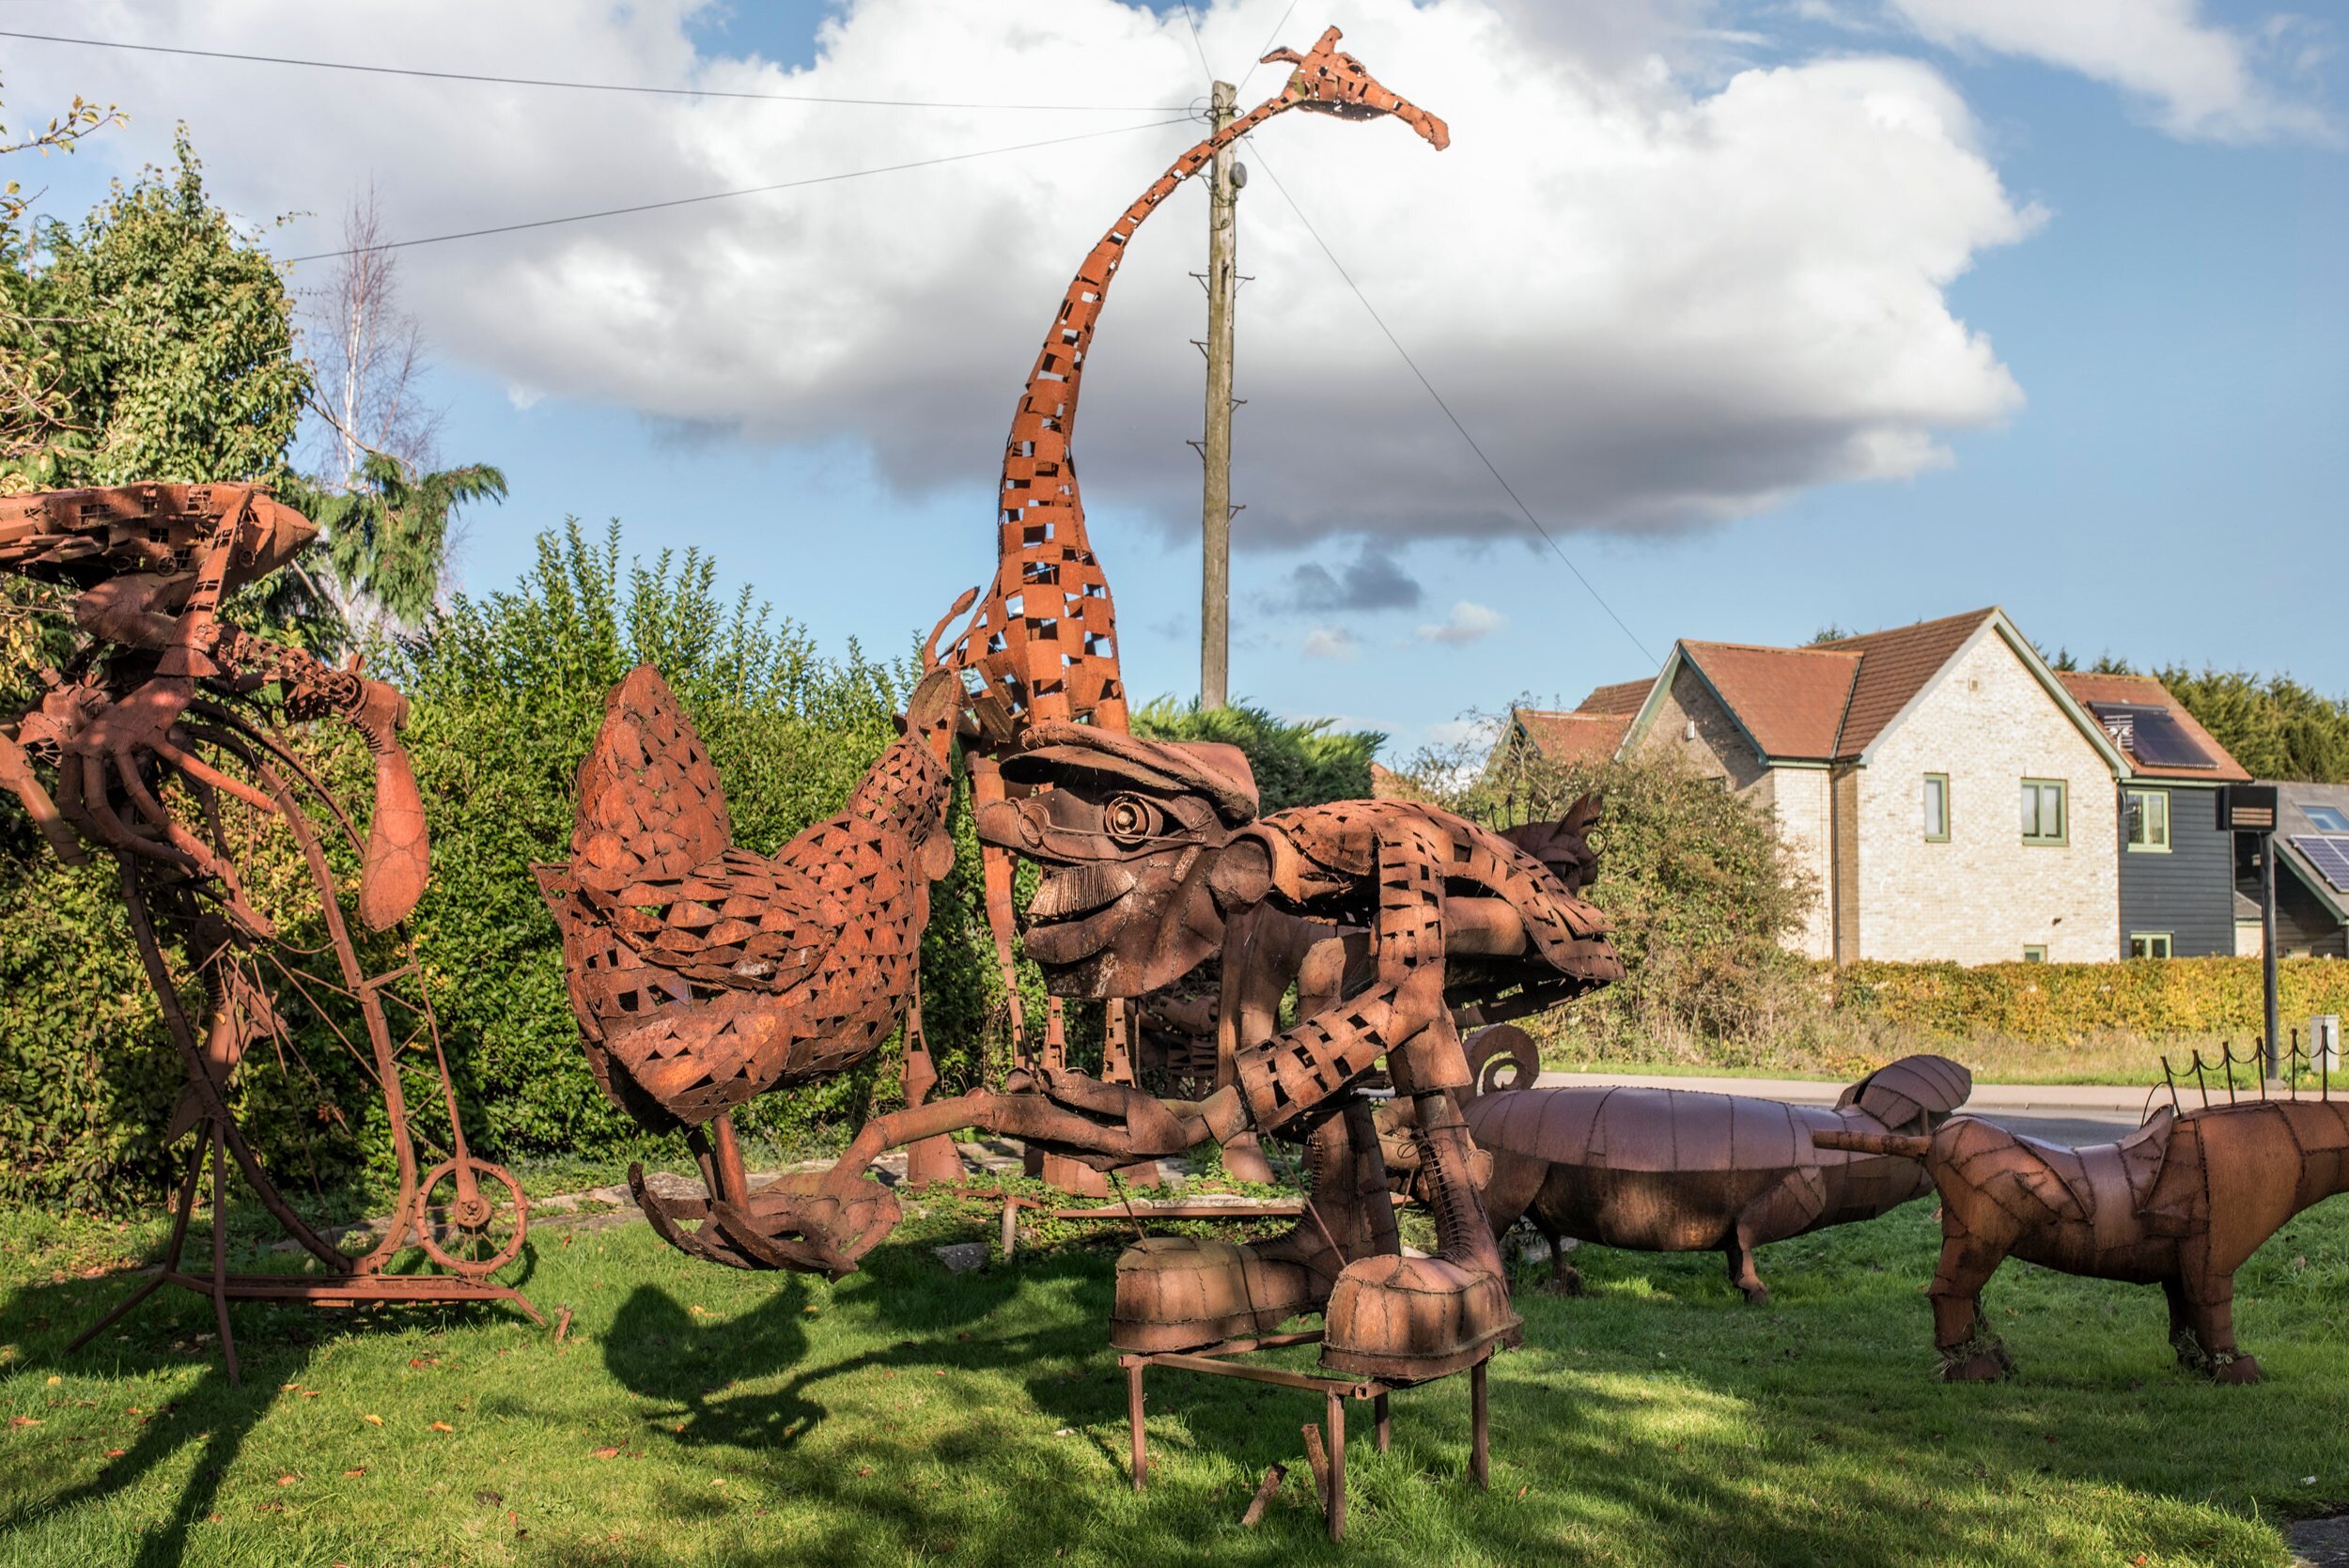 4 Sculpture Garden - Histon - Cambridgeshire - Tony Hillier - The Keepers Project - David Clegg -Thierry Bal.jpg